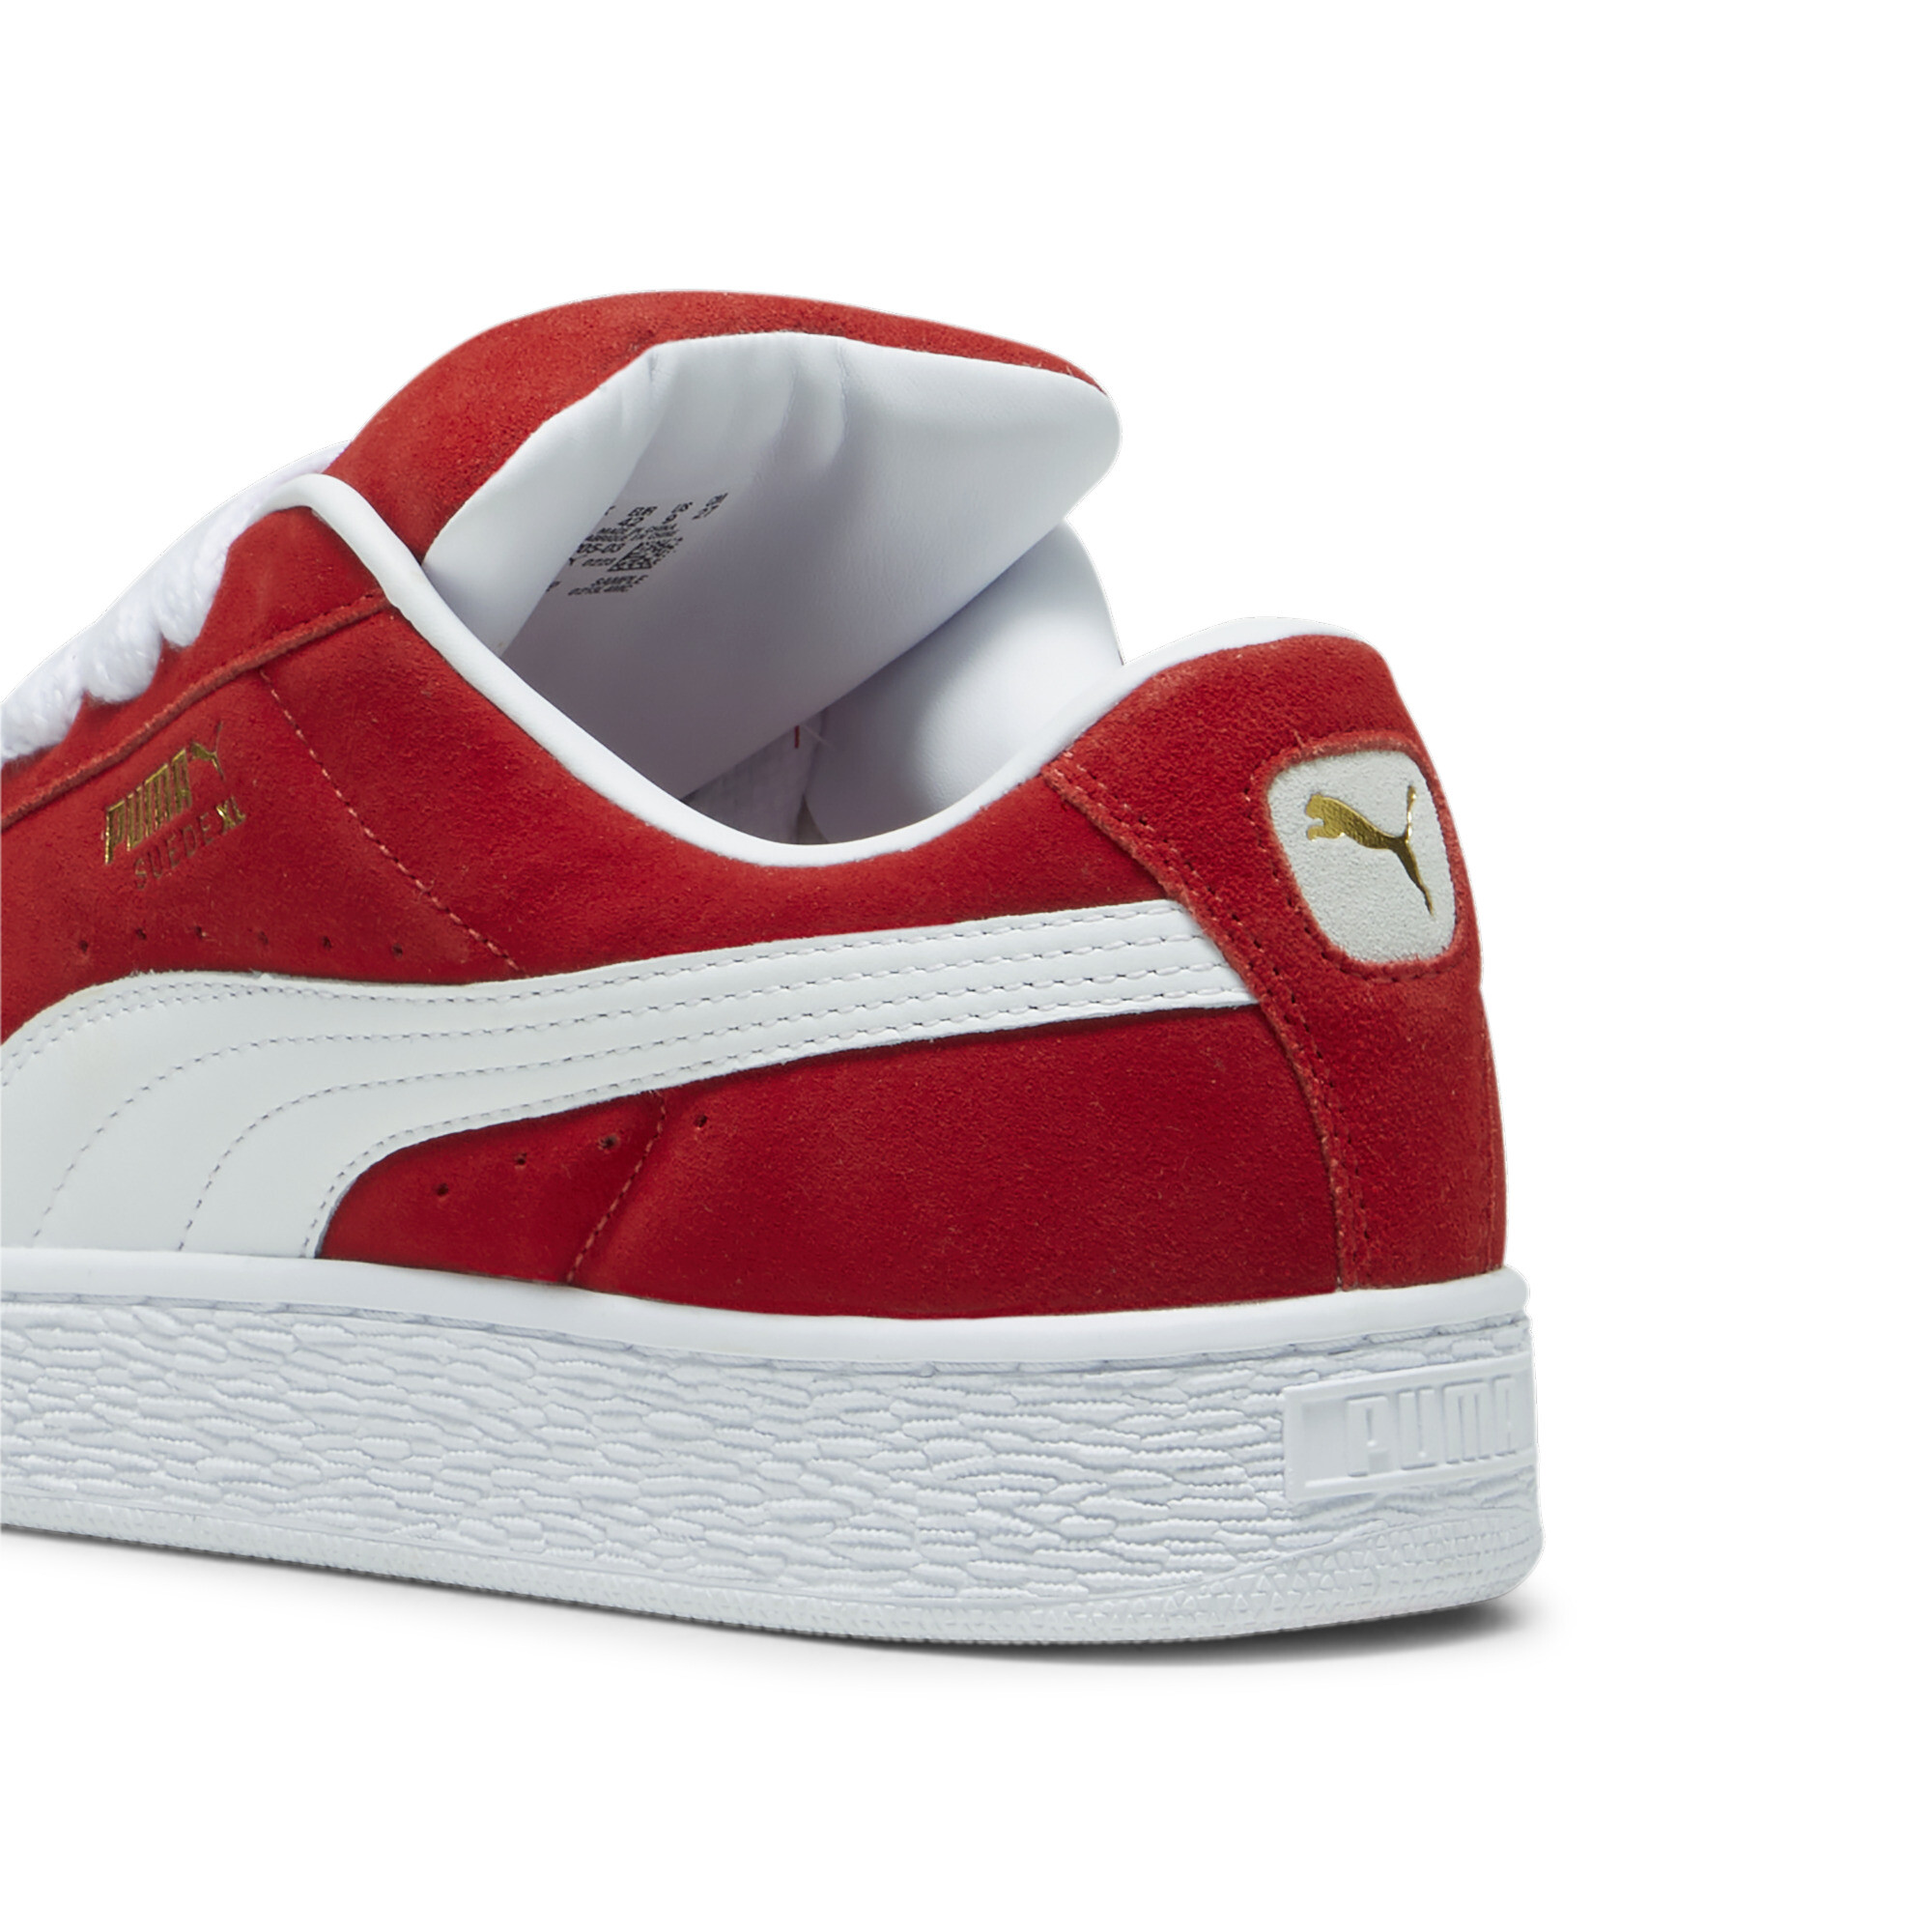 Puma Suede XL Sneakers Unisex, Red, Size 37, Shoes